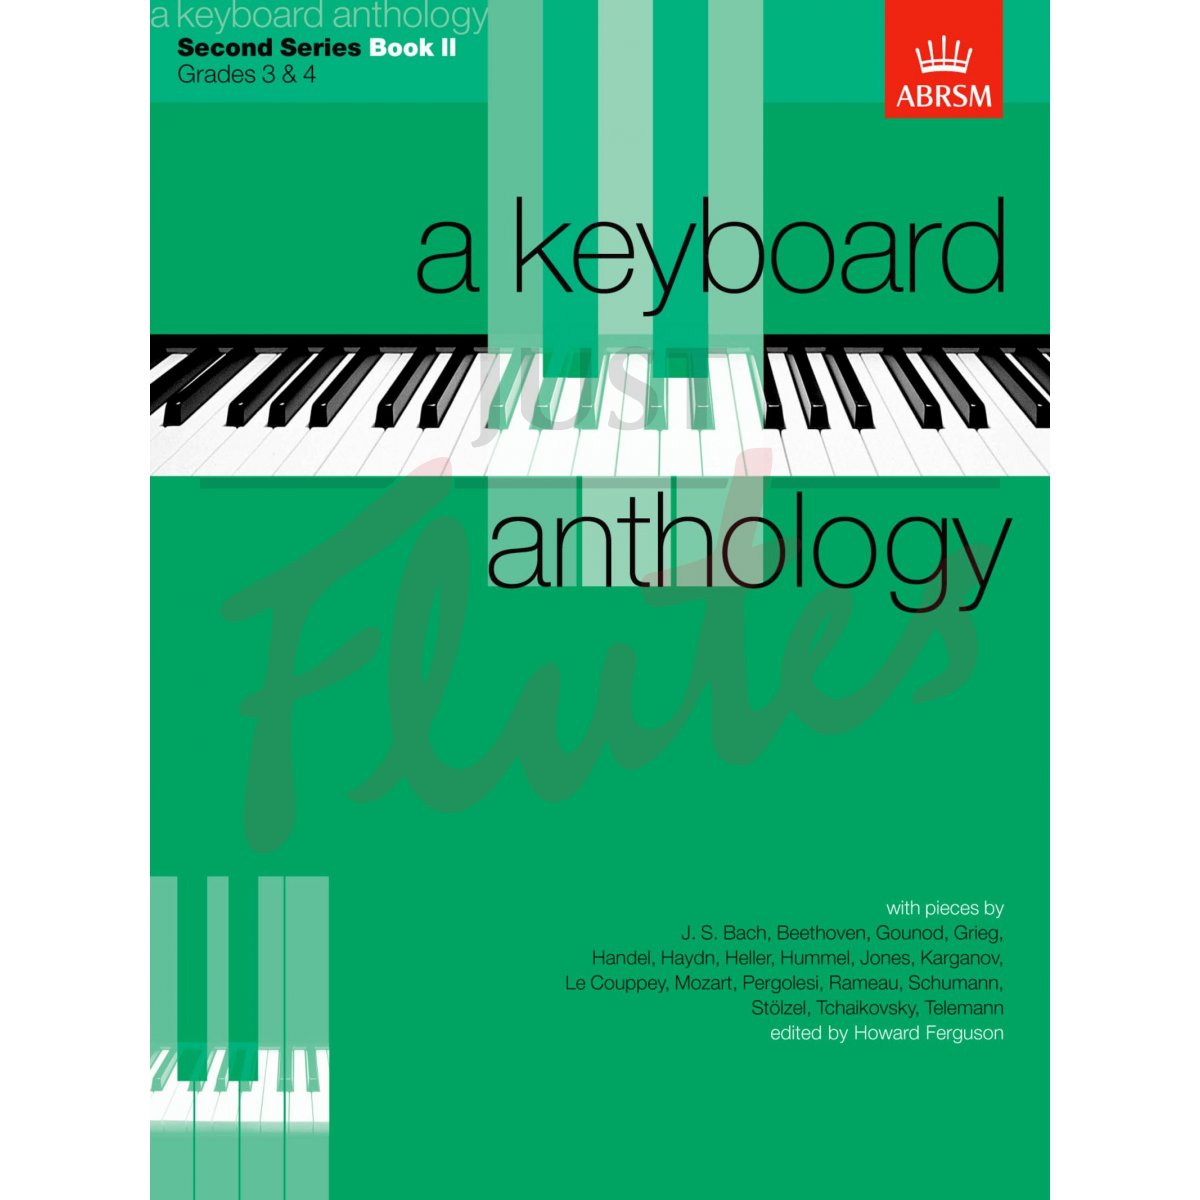 A Keyboard Anthology: Second Series Book 2